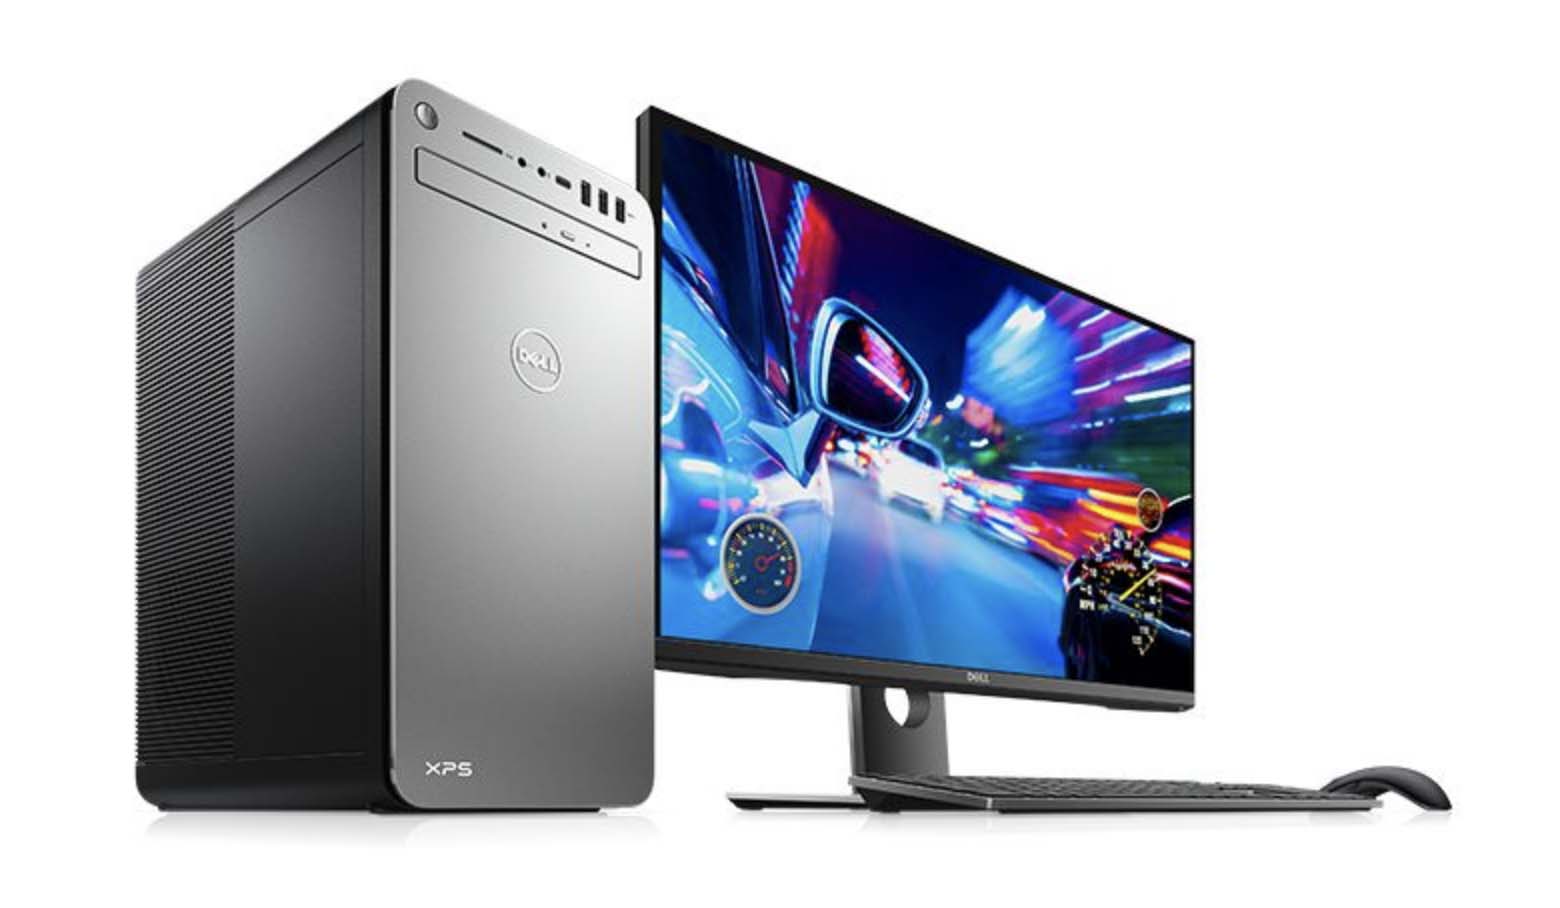 https://www.windowscentral.com/sites/wpcentral.com/files/styles/large/public/field/image/2019/12/dell-xps-special-edition-tower-render-02.jpg?itok=4r6EMiWP